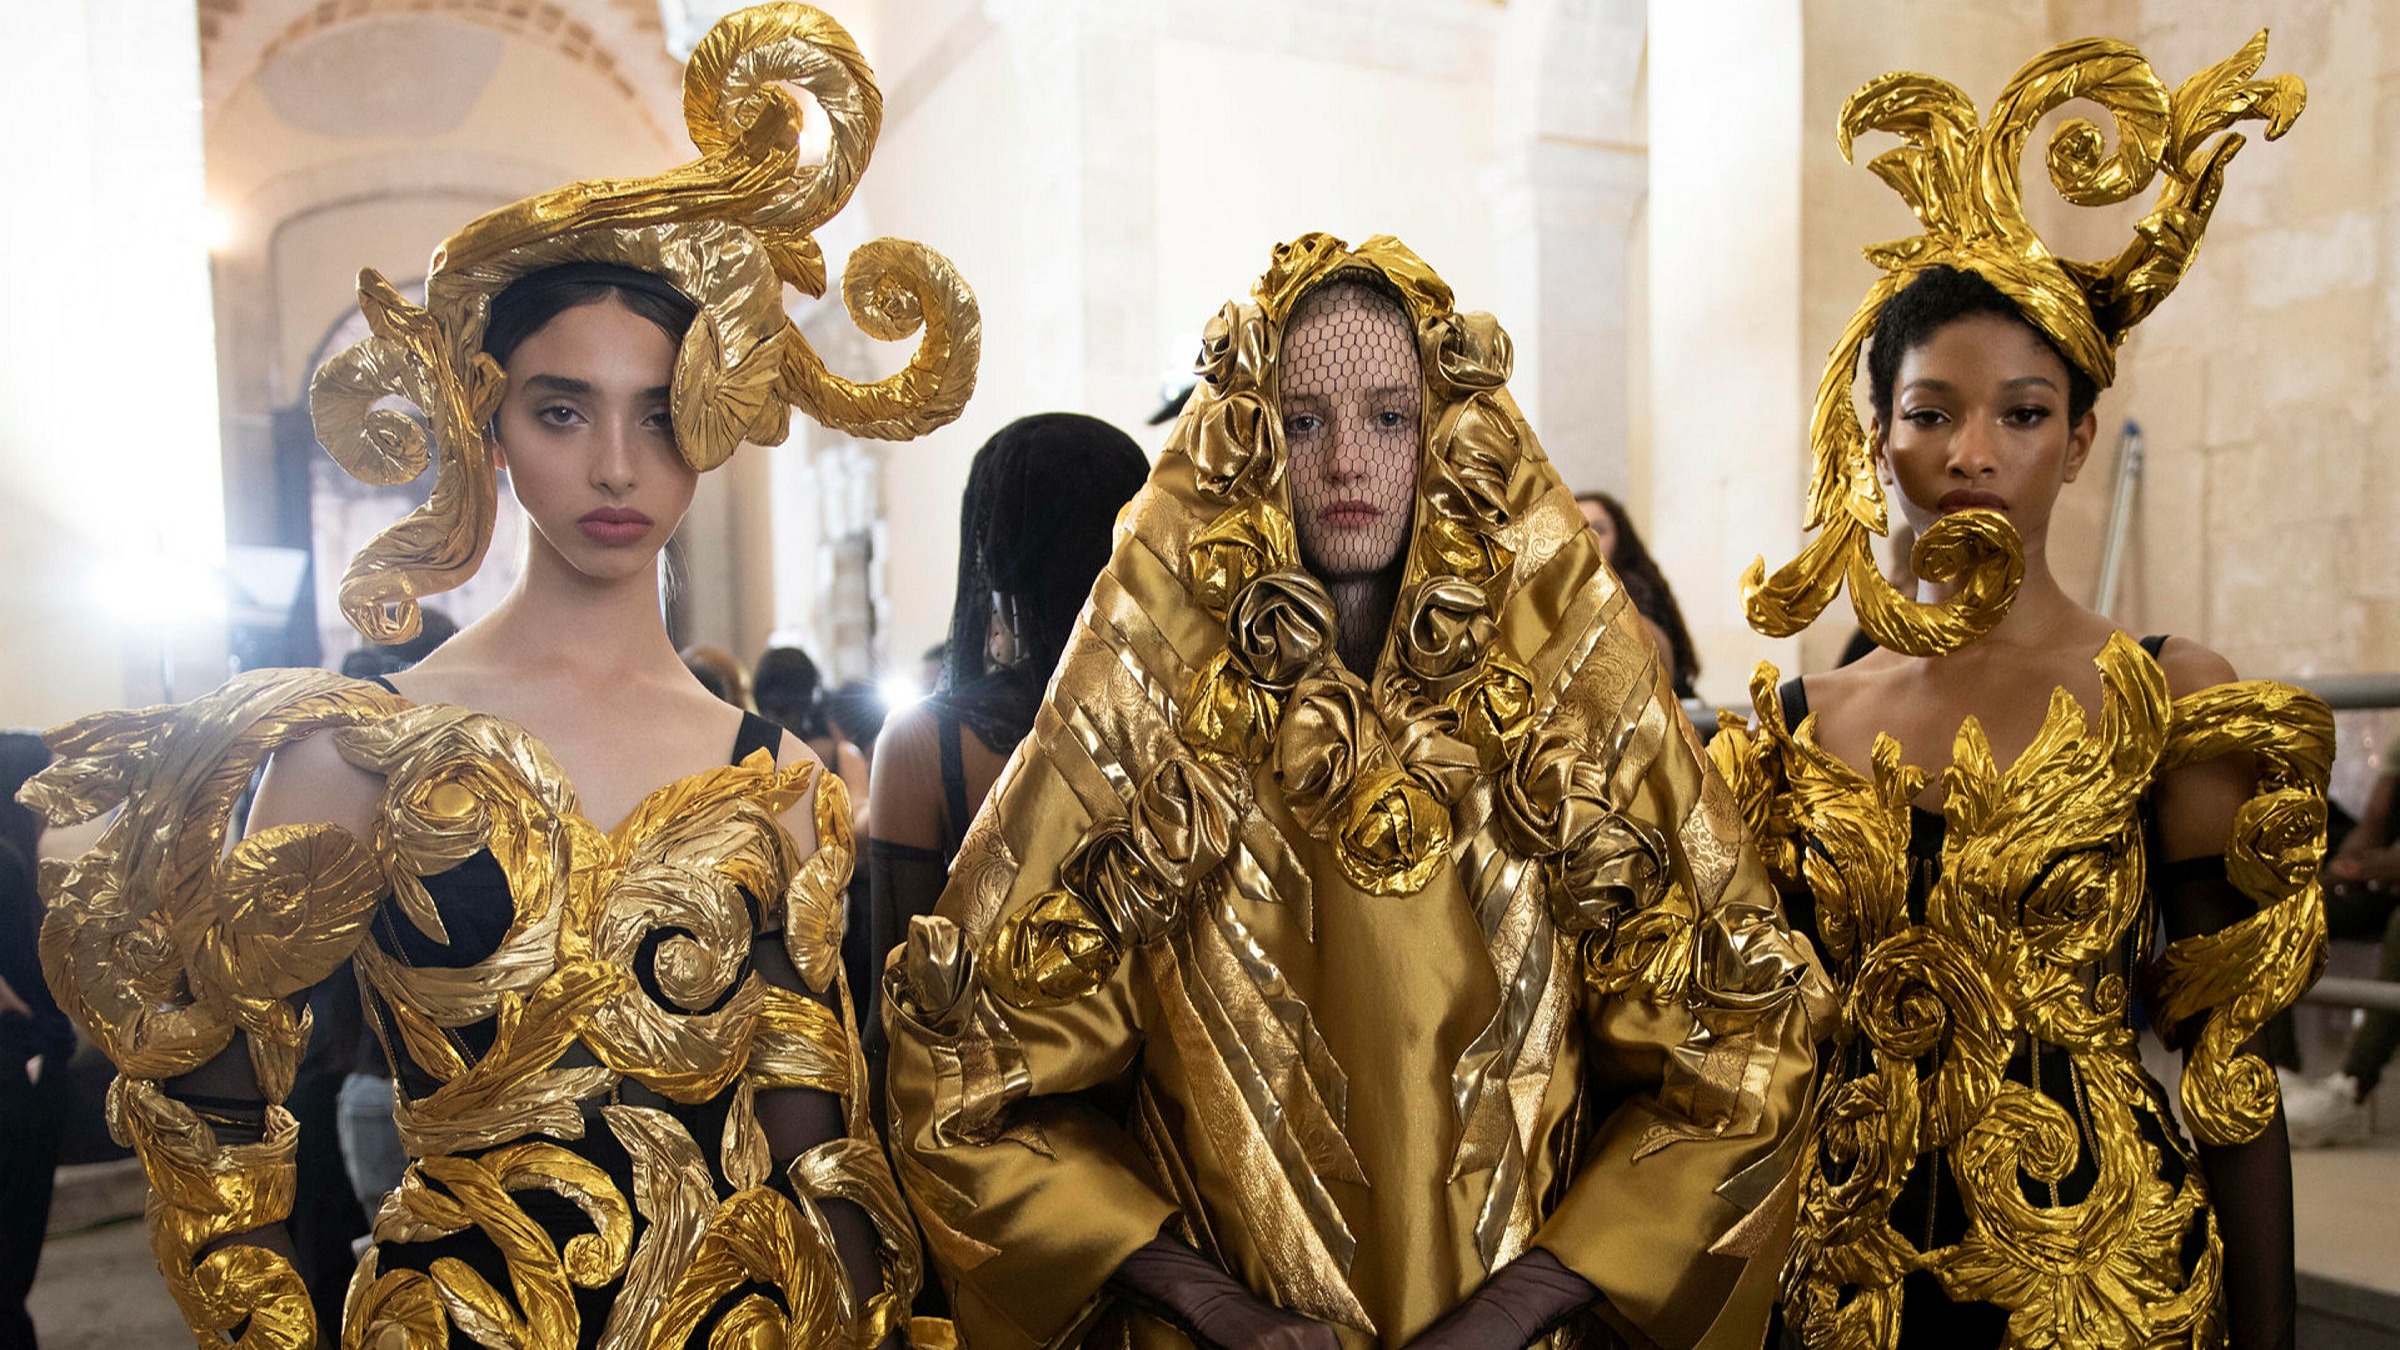 Dolce and gabbana brings italy's centuries-old artistic and cultural heritage to its expensive 10th anniversary fashion show